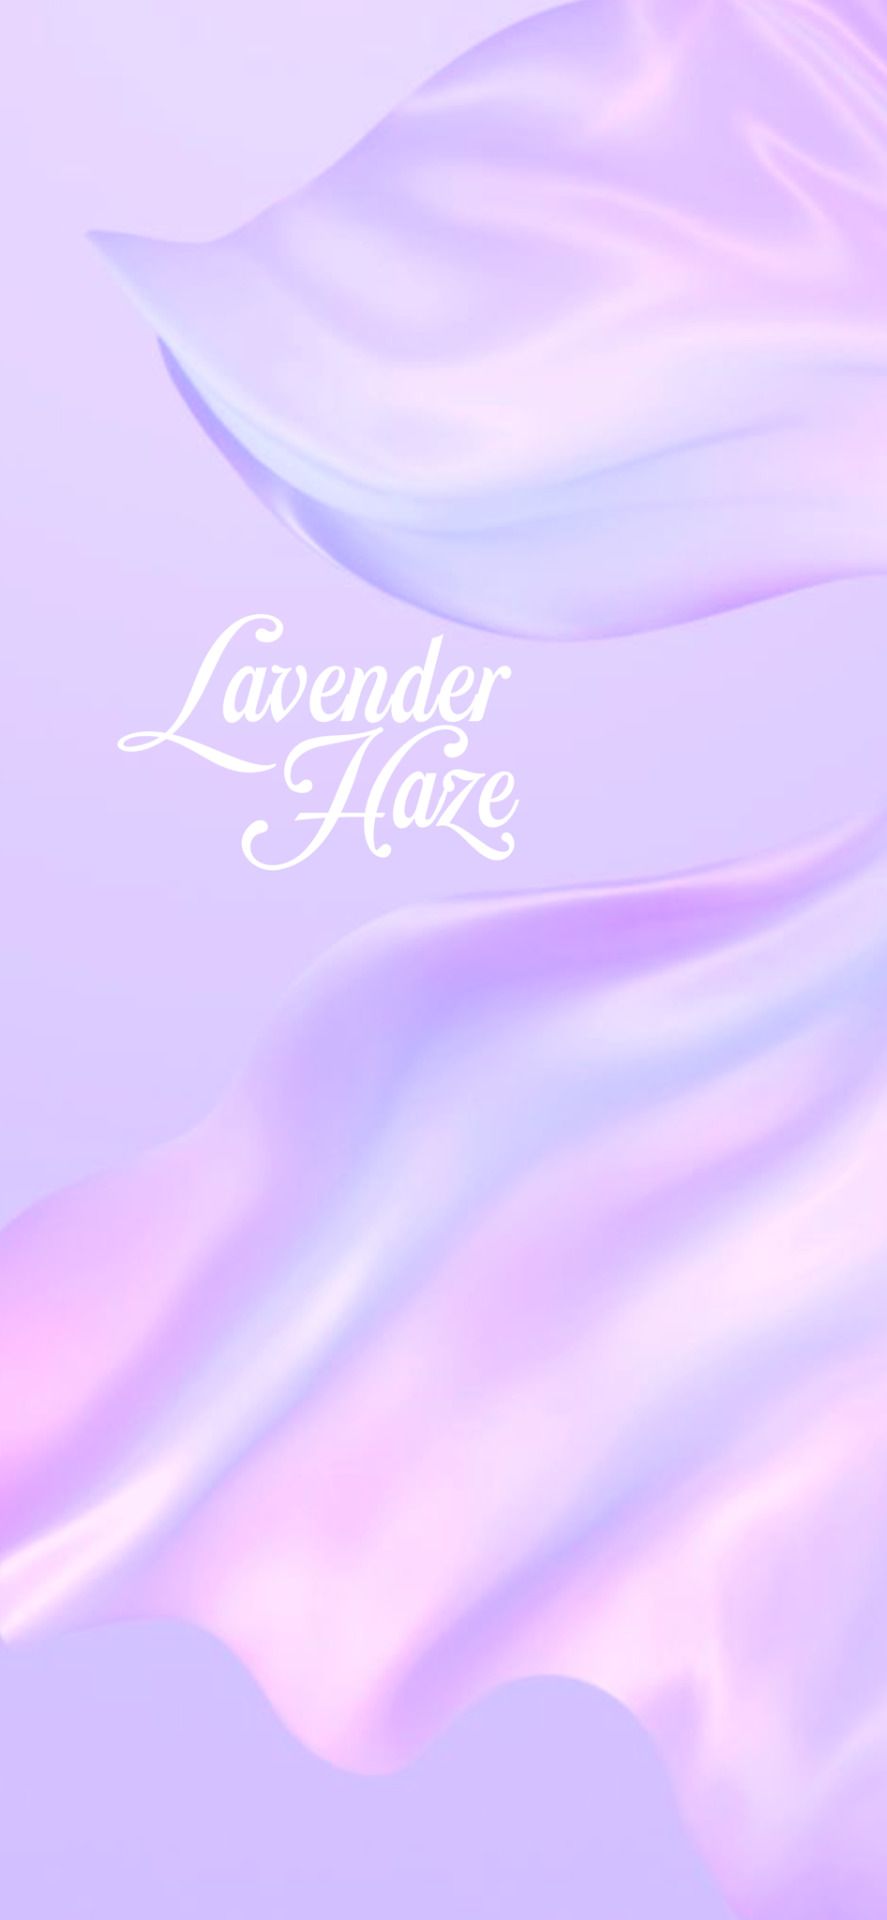 Lavender haze is a new perfume - Taylor Swift